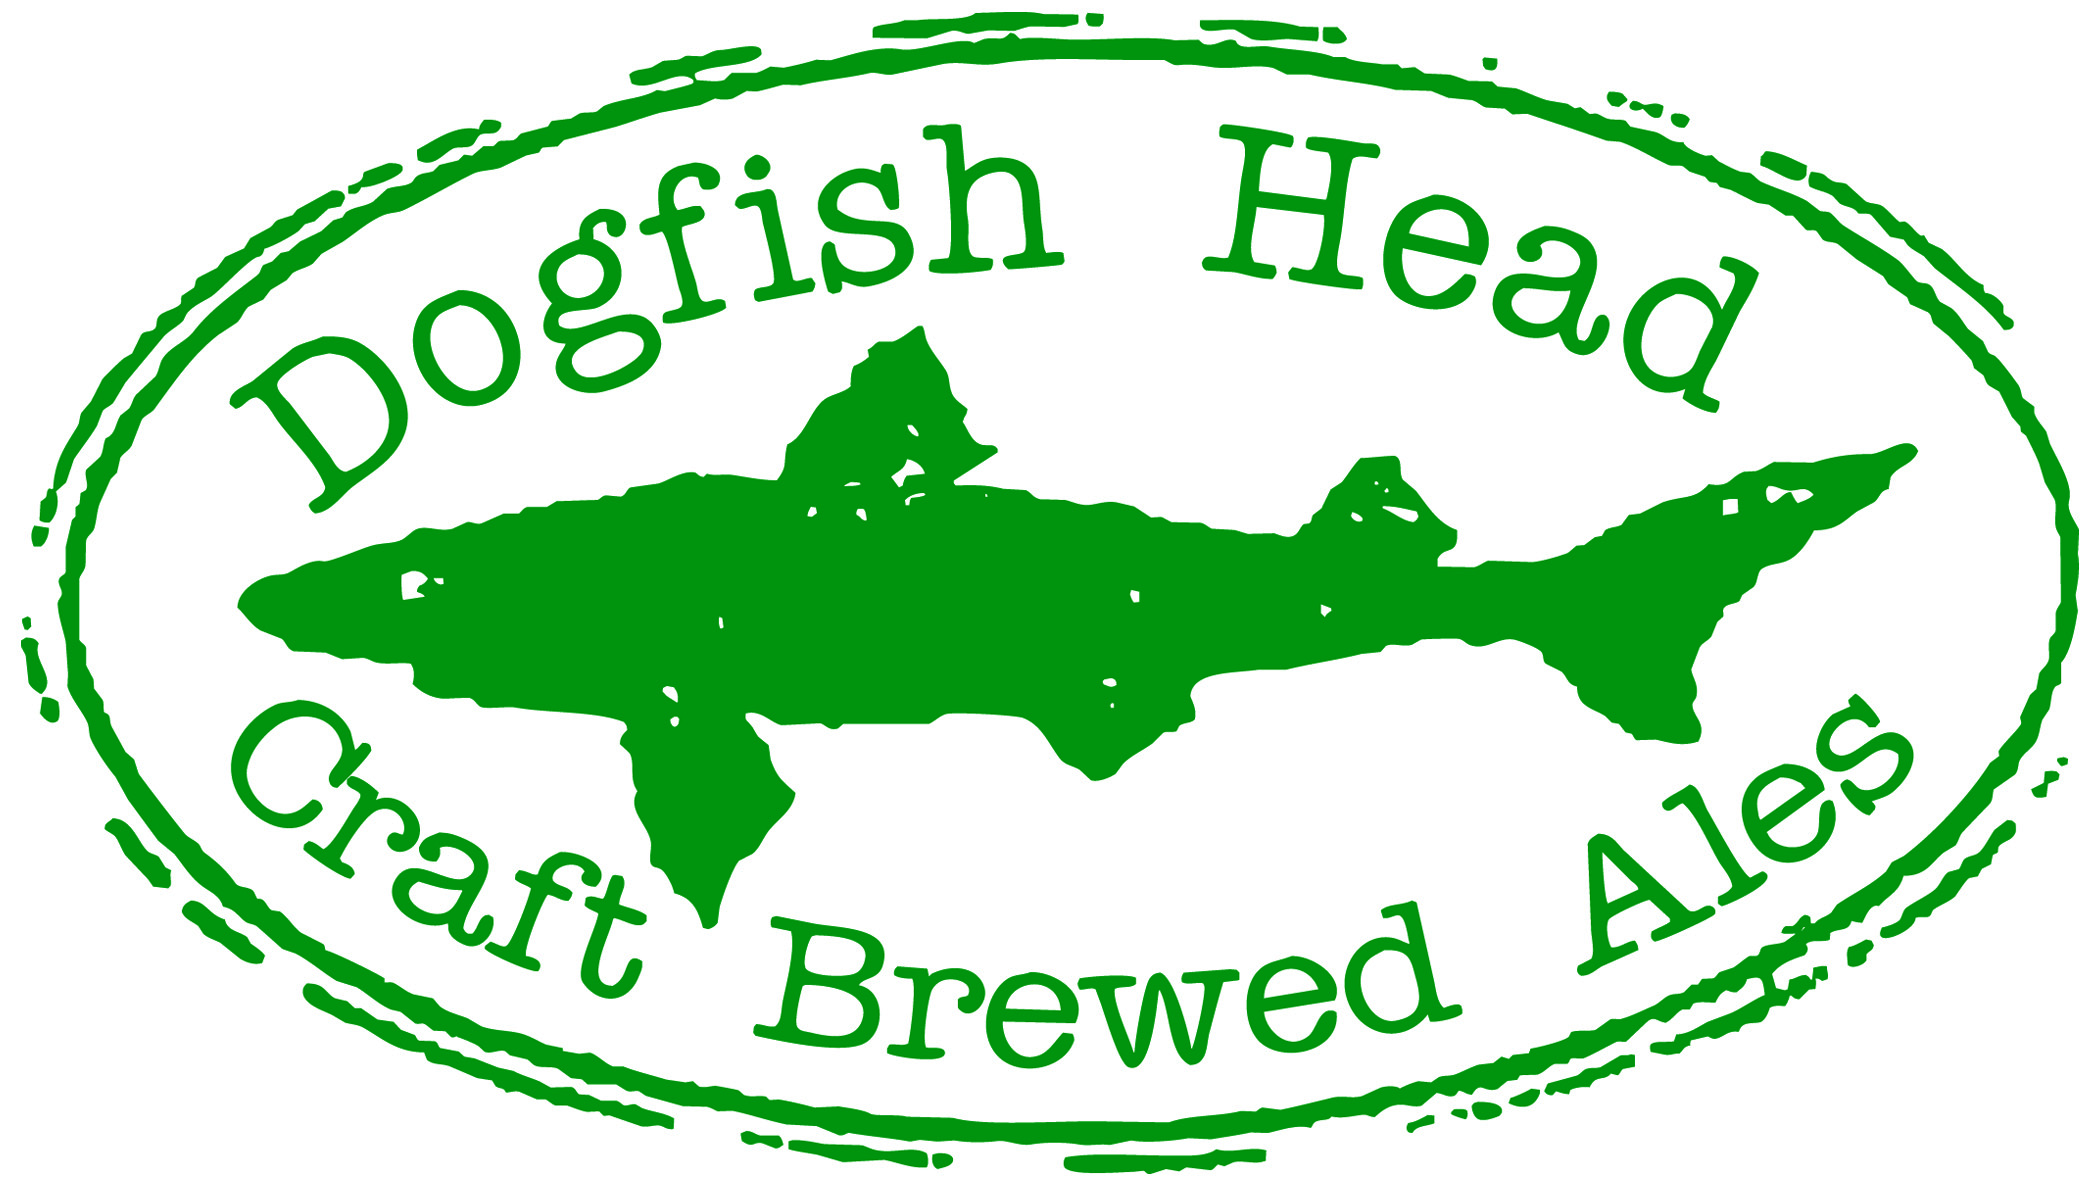 Oysters and Beer, featuring Dogfish Head